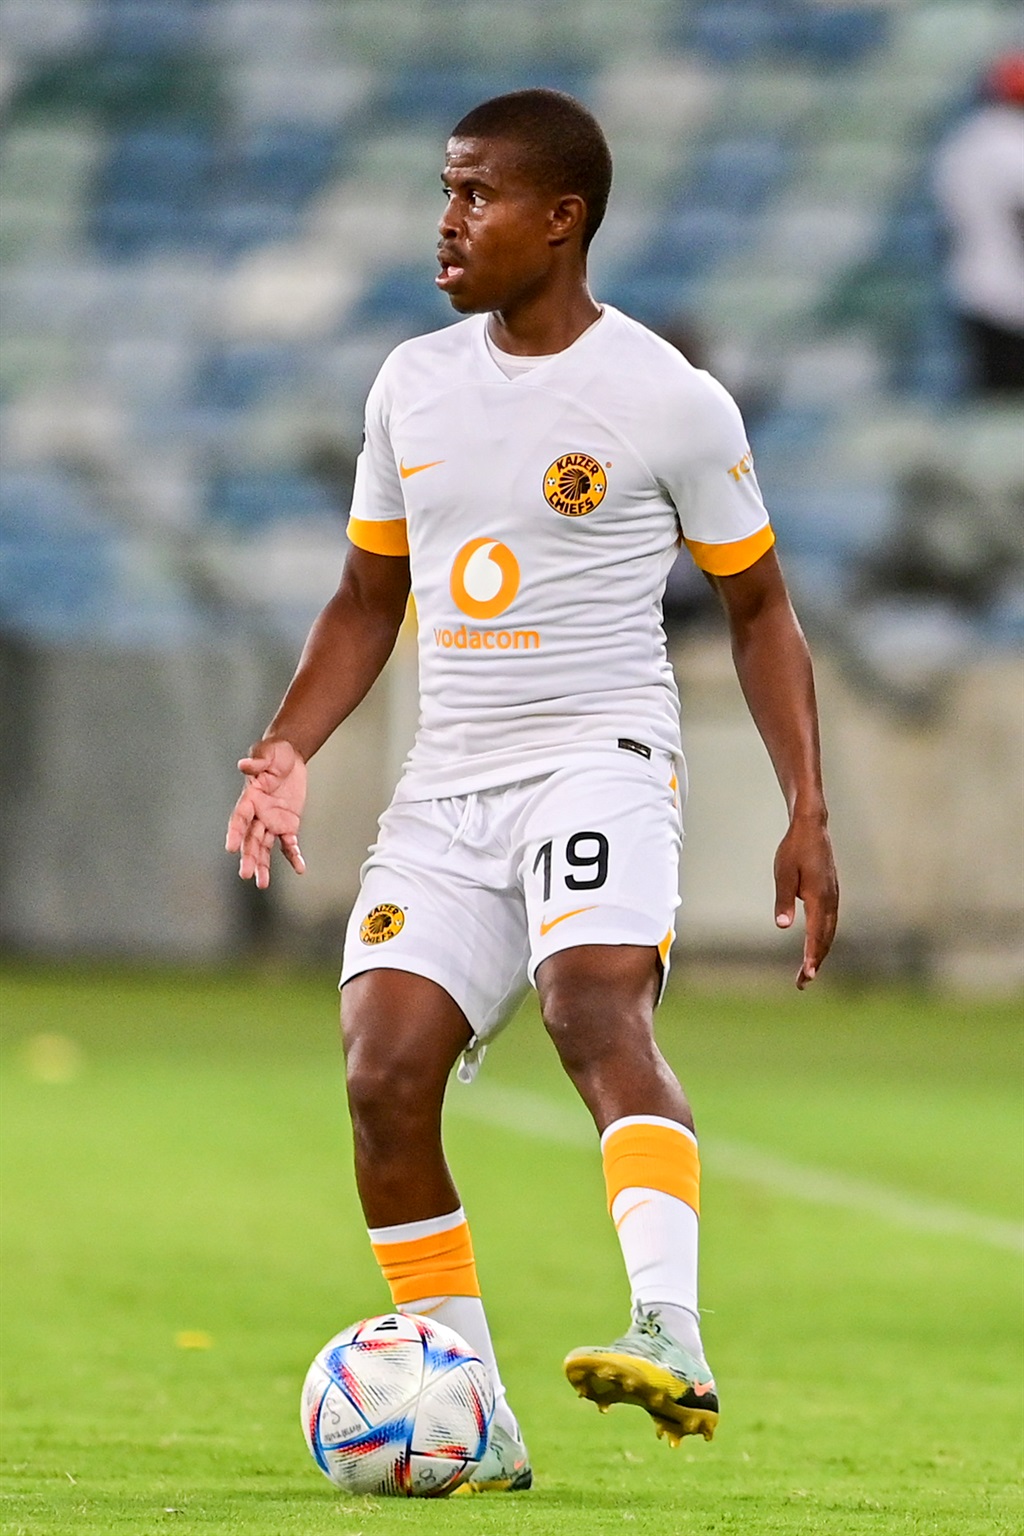 DURBAN, SOUTH AFRICA - JANUARY 13: Happy Mashiane of Kaizer Chiefs during the DStv Premiership match between AmaZulu FC and Kaizer Chiefs at Moses Mabhida Stadium on January 13, 2023 in Durban, South Africa. (Photo by Darren Stewart/Gallo Images)